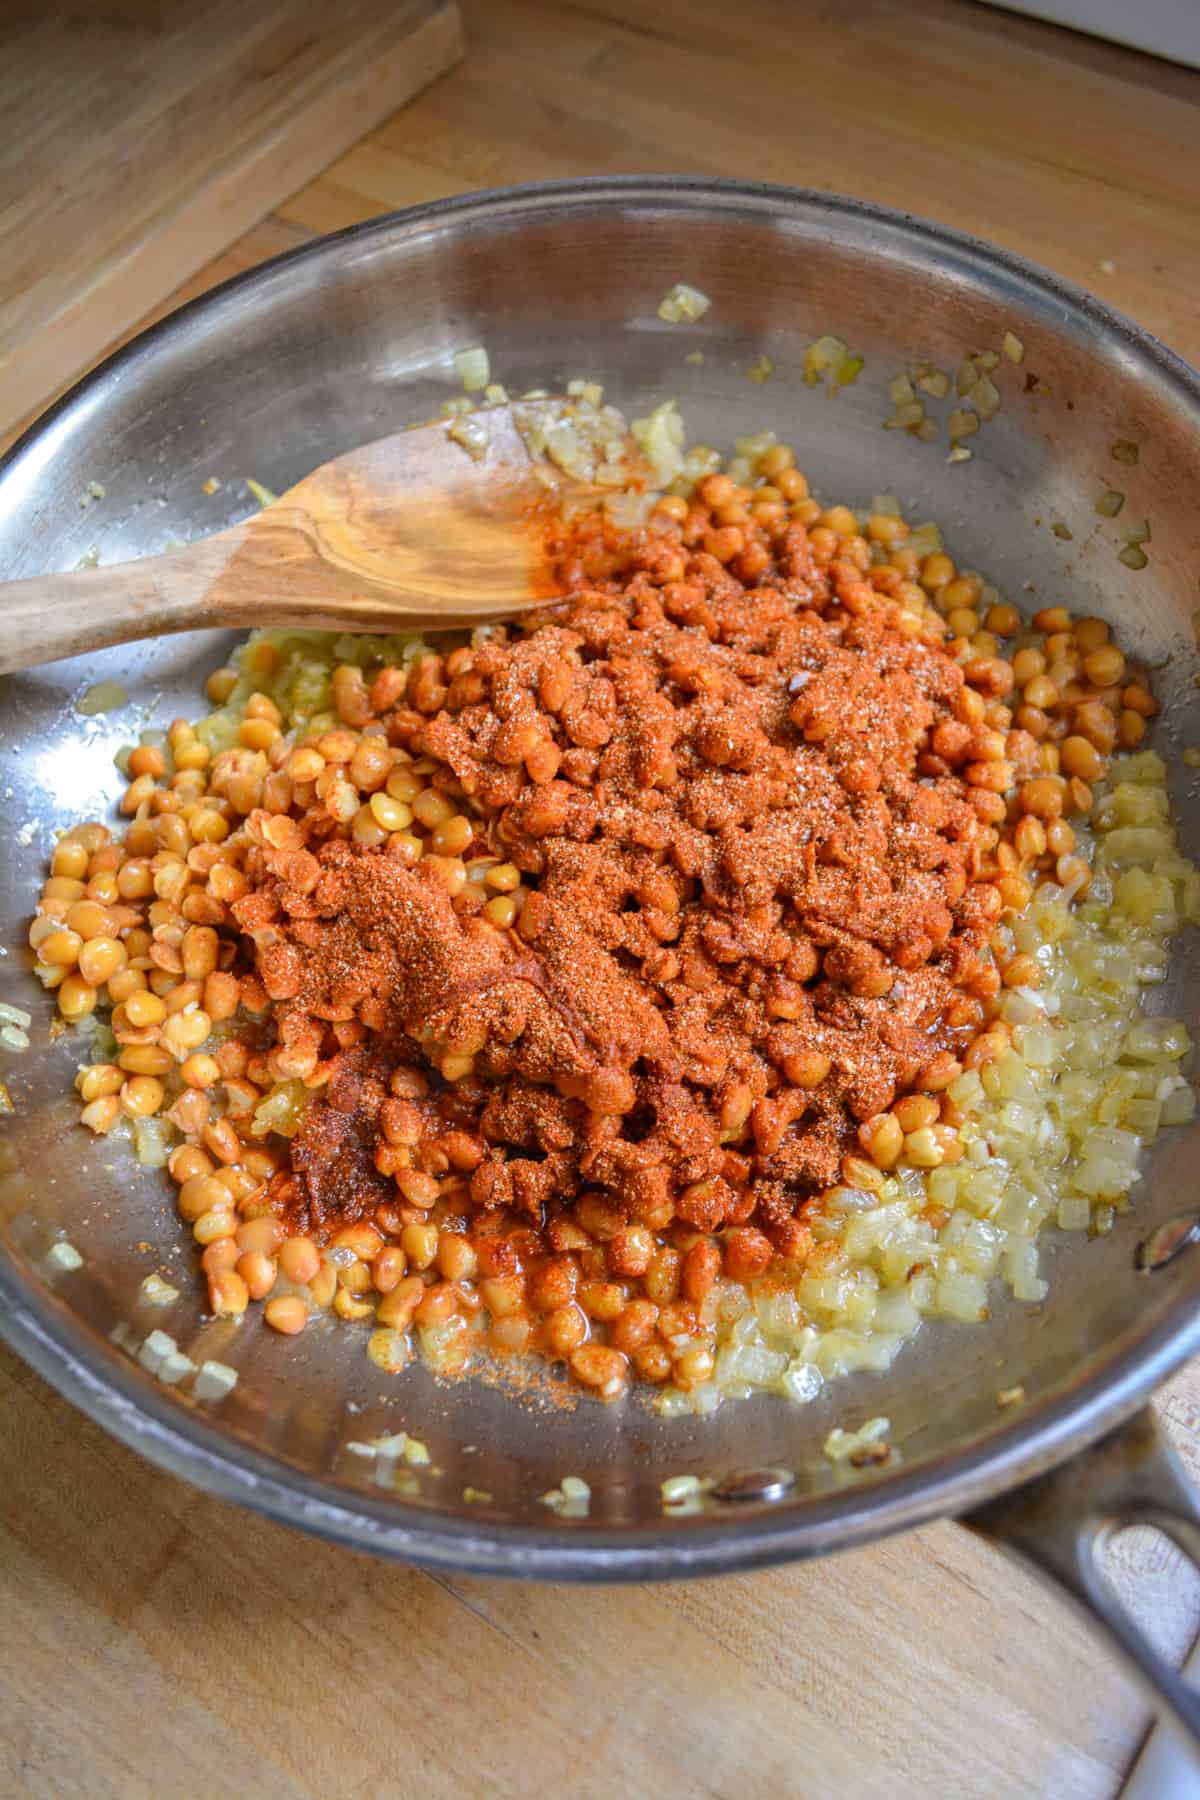 Lentils, spices and water added to a stainless steel skillet with a wooden spoon to the left.